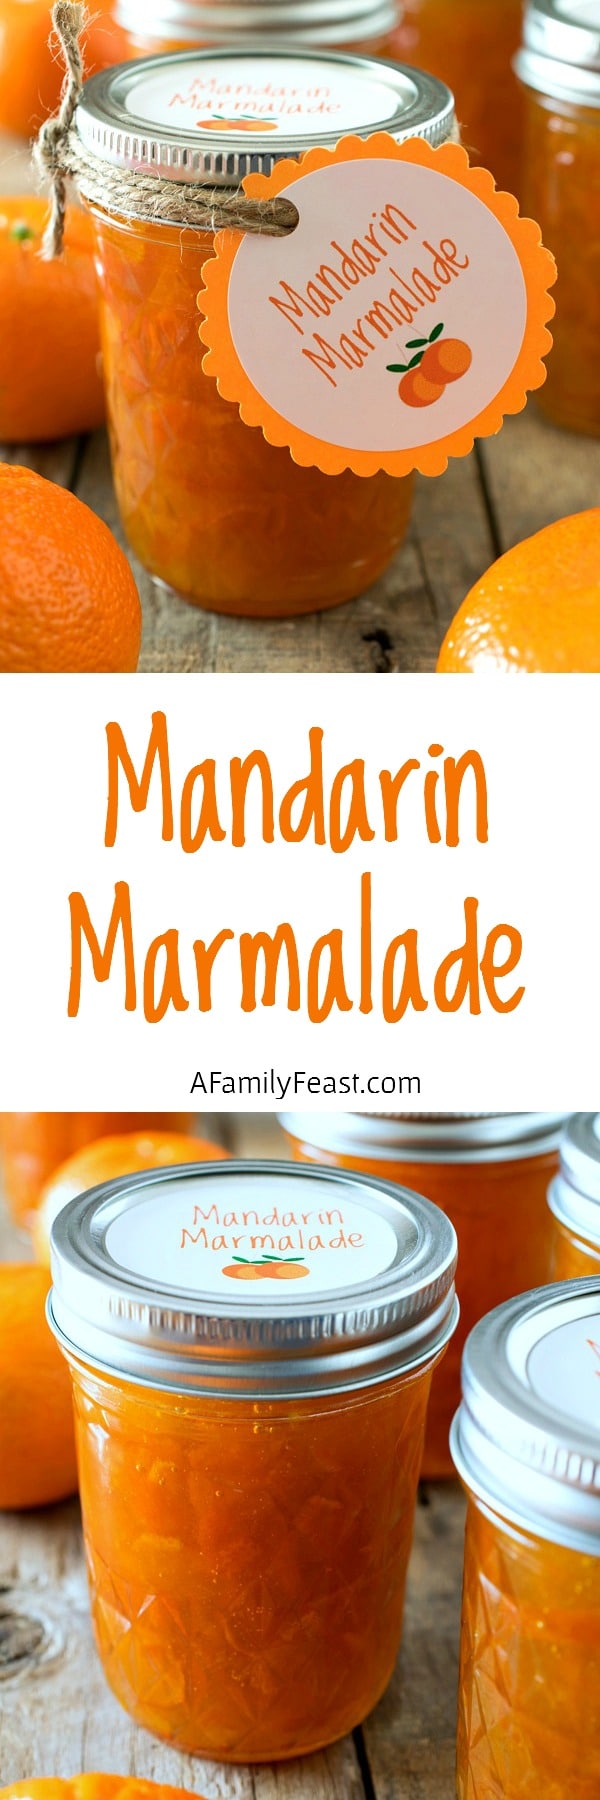 Mandarin Marmalade - Fresh mandarin oranges with a hint of lemon. This marmalade is fantastic! Includes a link to a free printable for labels or gift tags.